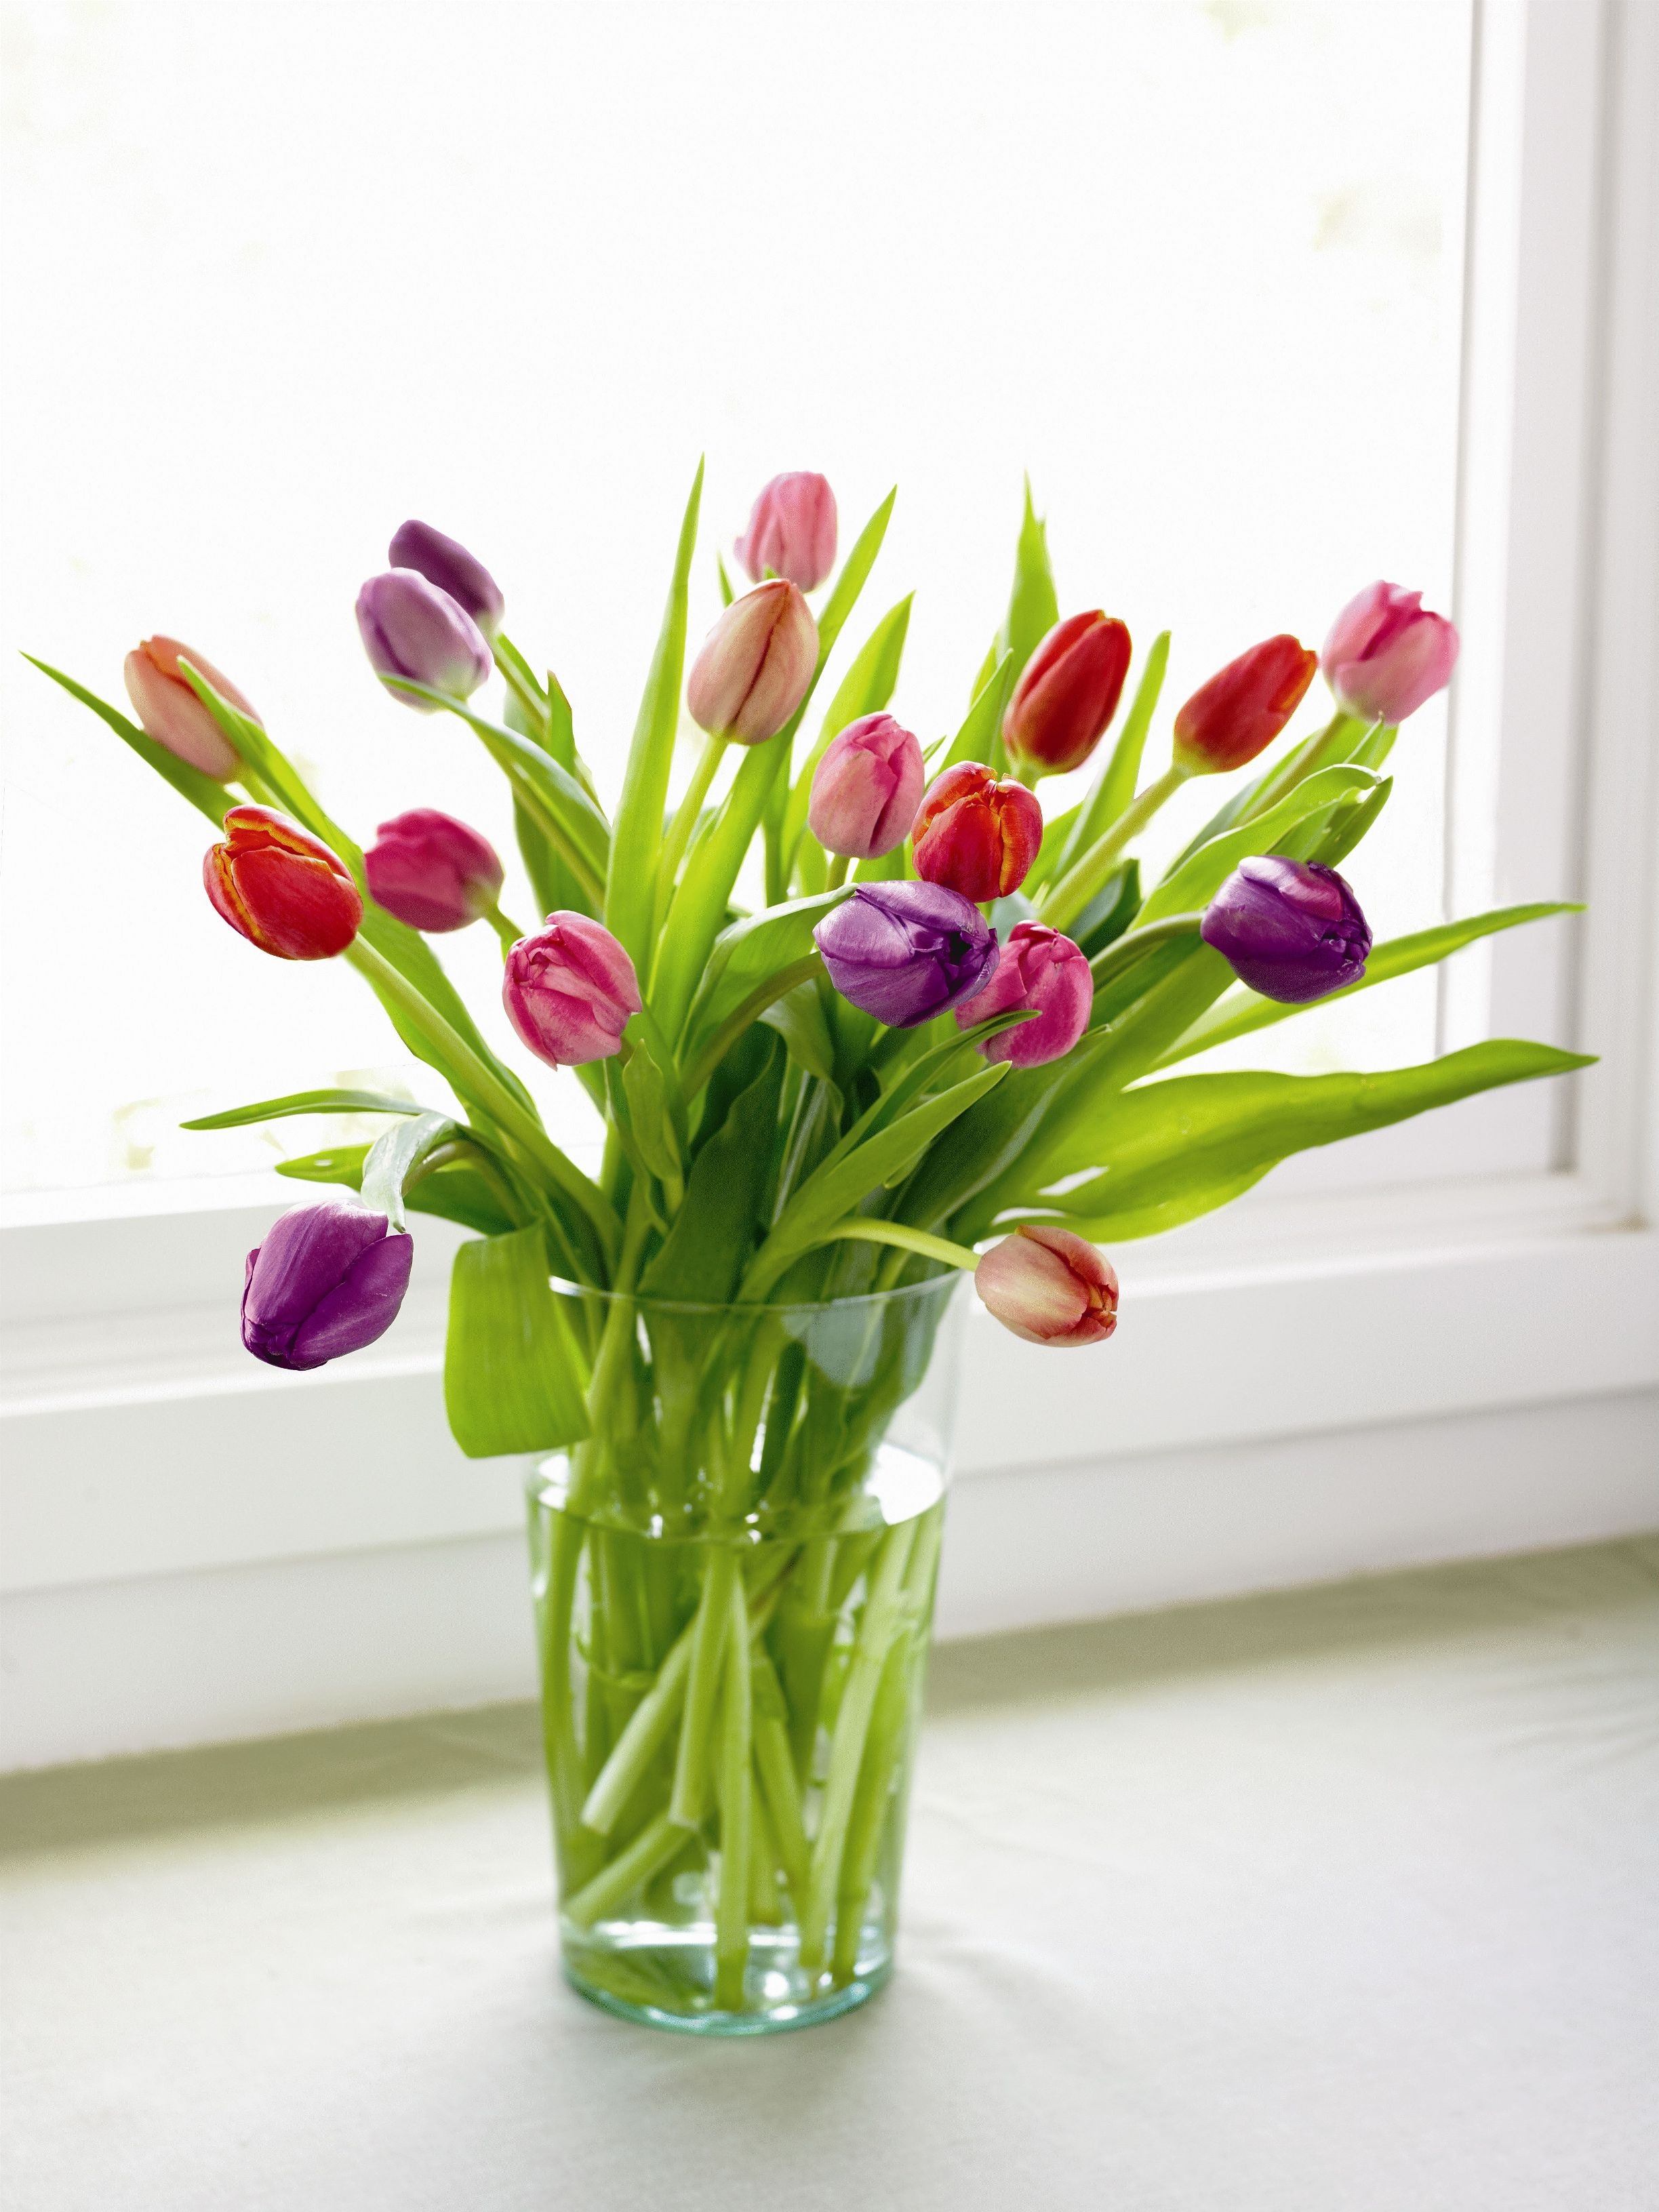 The Benefits of Having Fresh Flowers in the Home